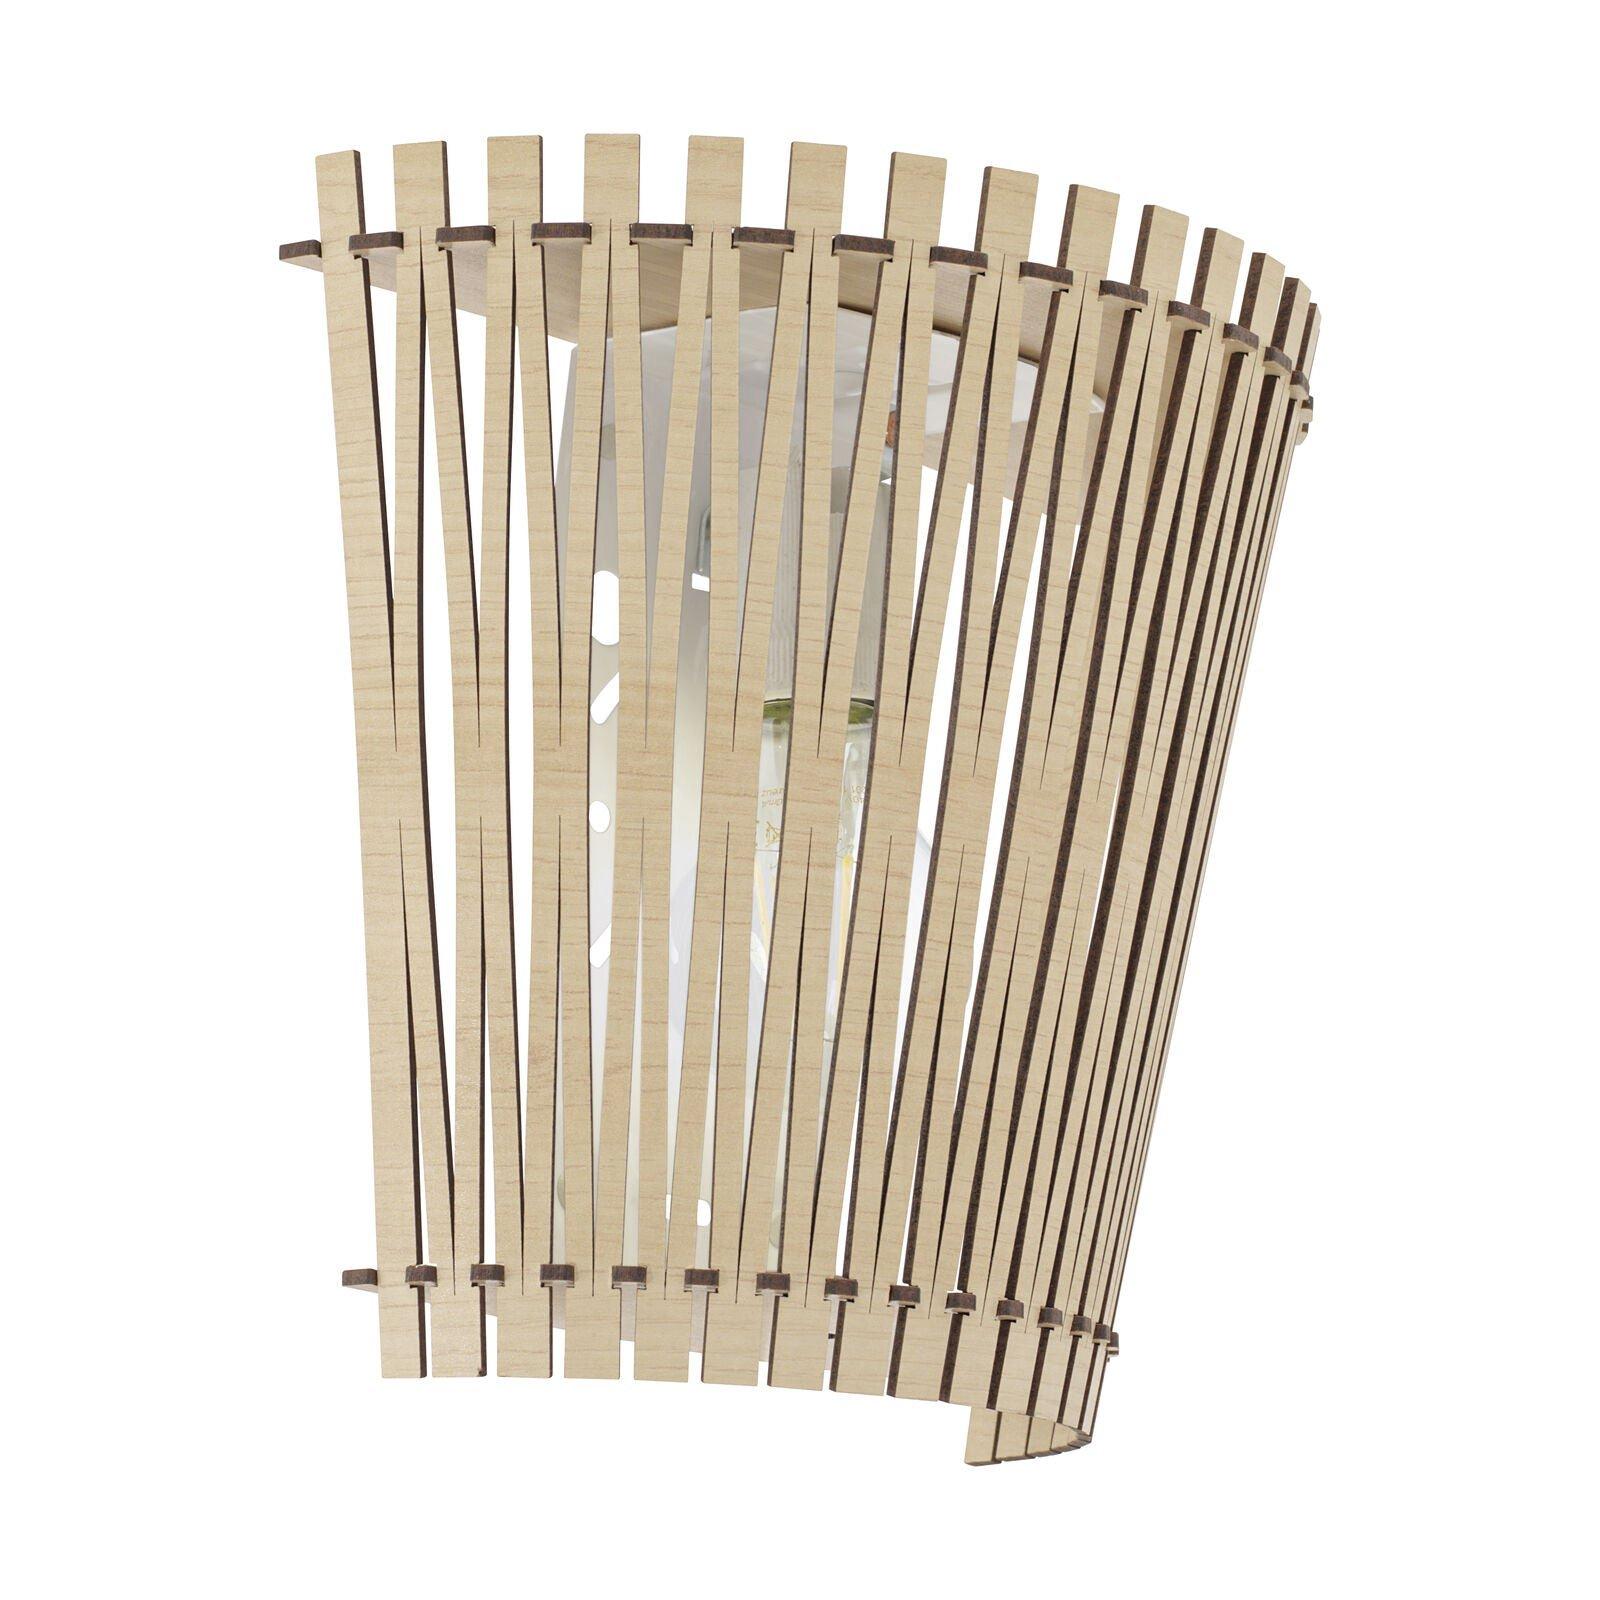 Wall Light Colour White Shade Maple Wood Fencing Surround Bulb E27 1x60W